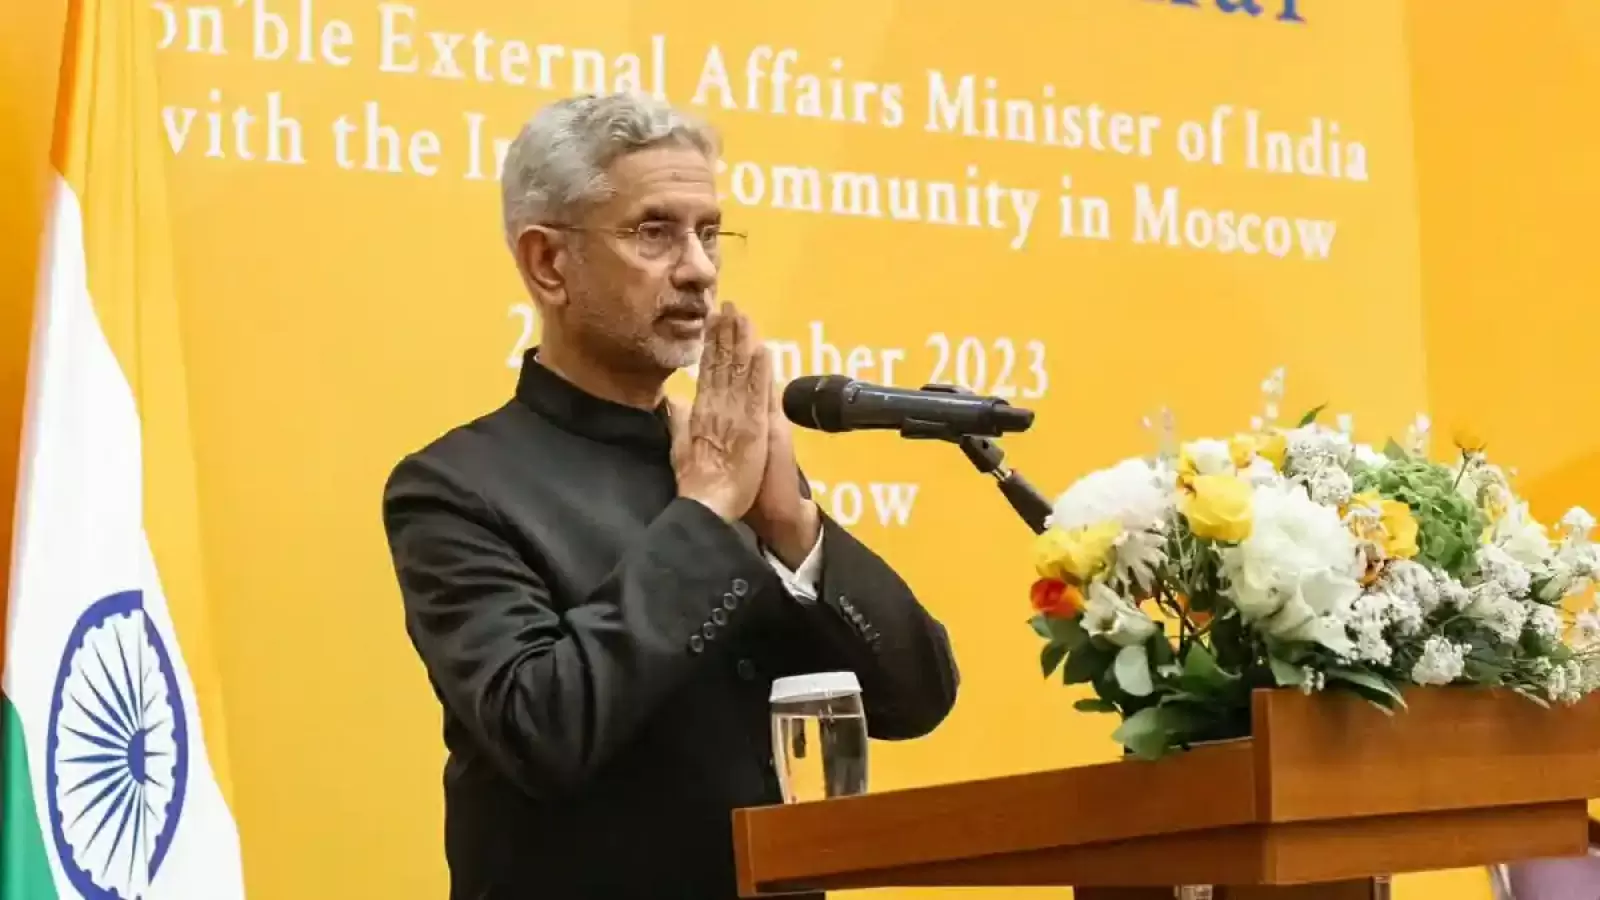 Today, Jaishankar departs for a two-day tour of Australia, where he will take part in the seventh Indian Ocean Conference